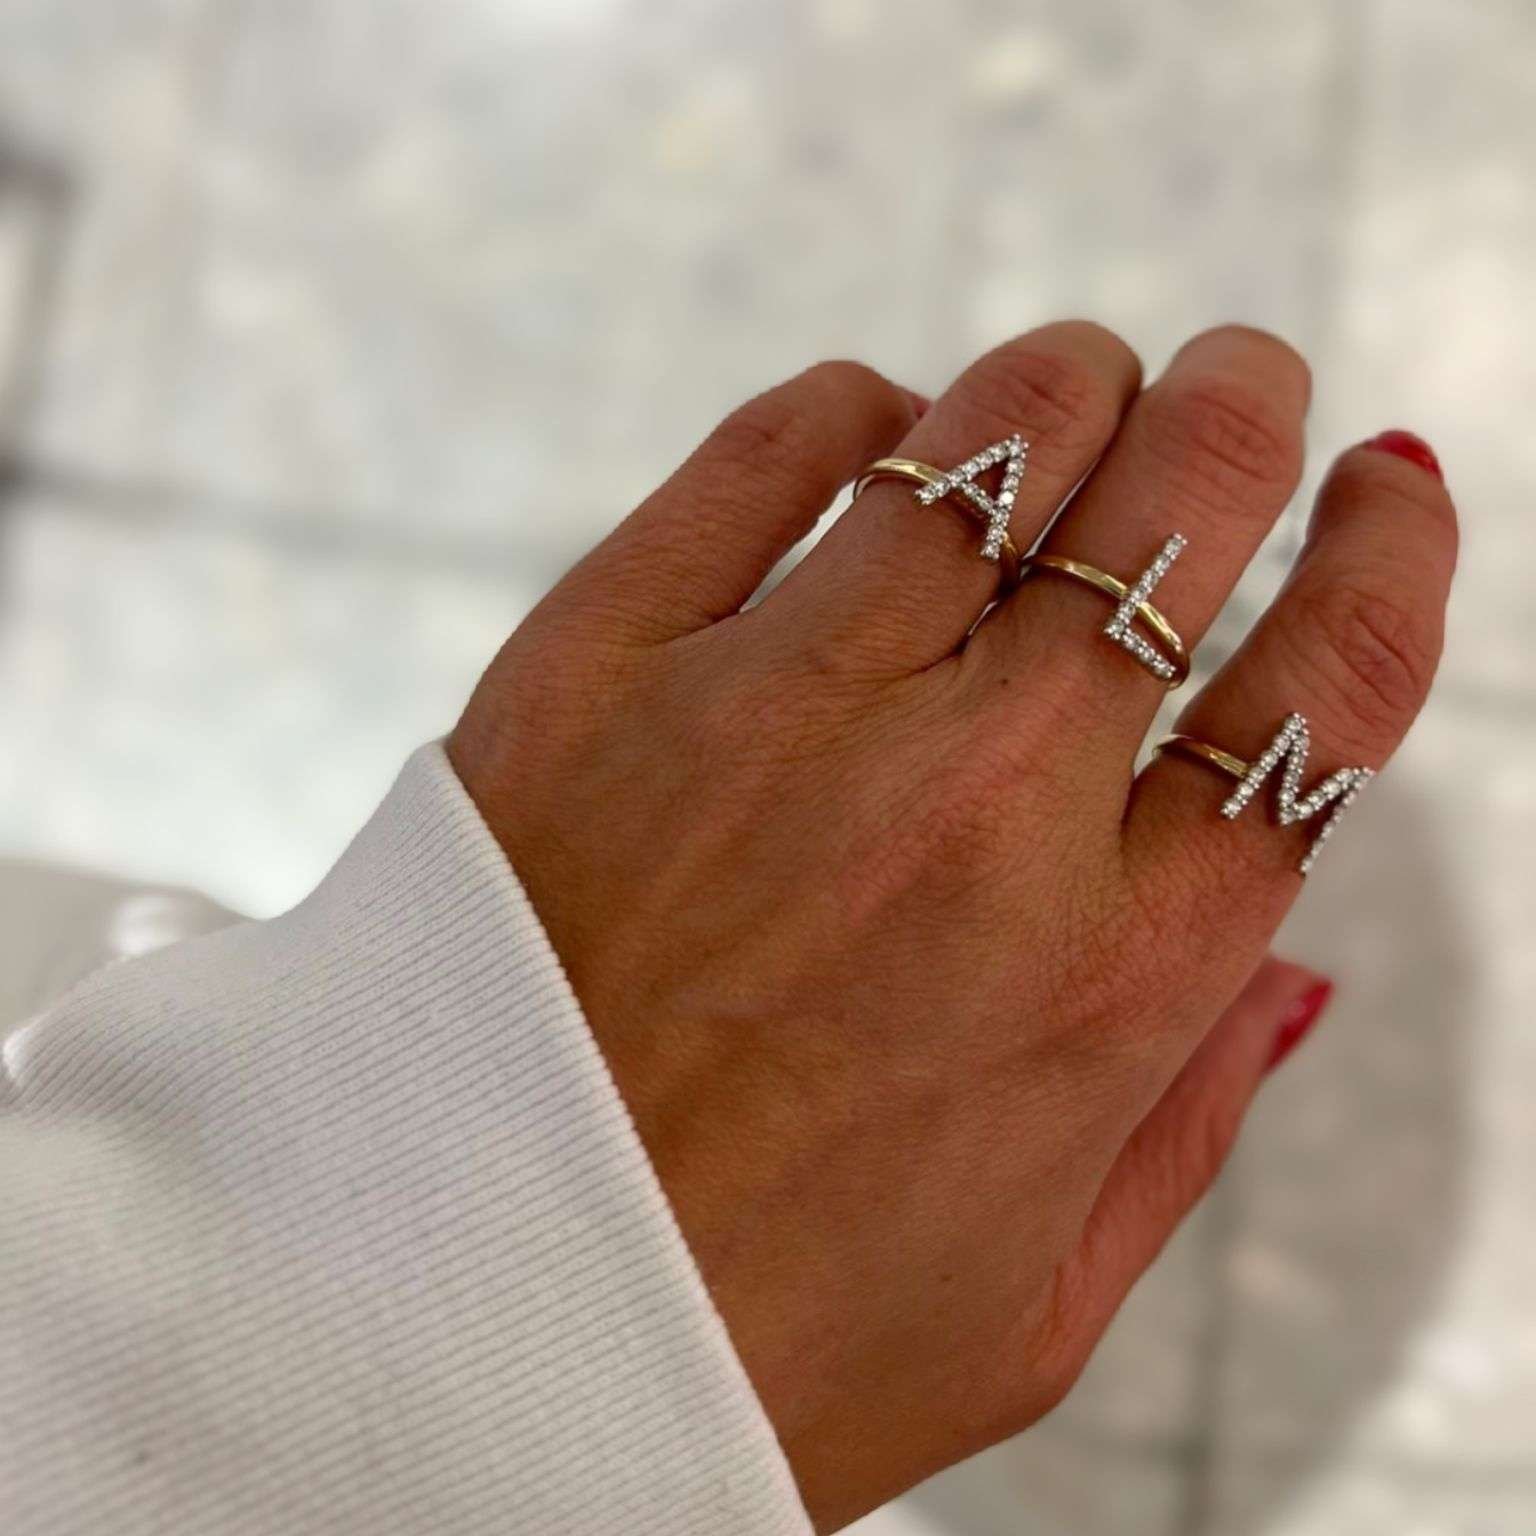 Initial Rings: More Than Just an Accessory